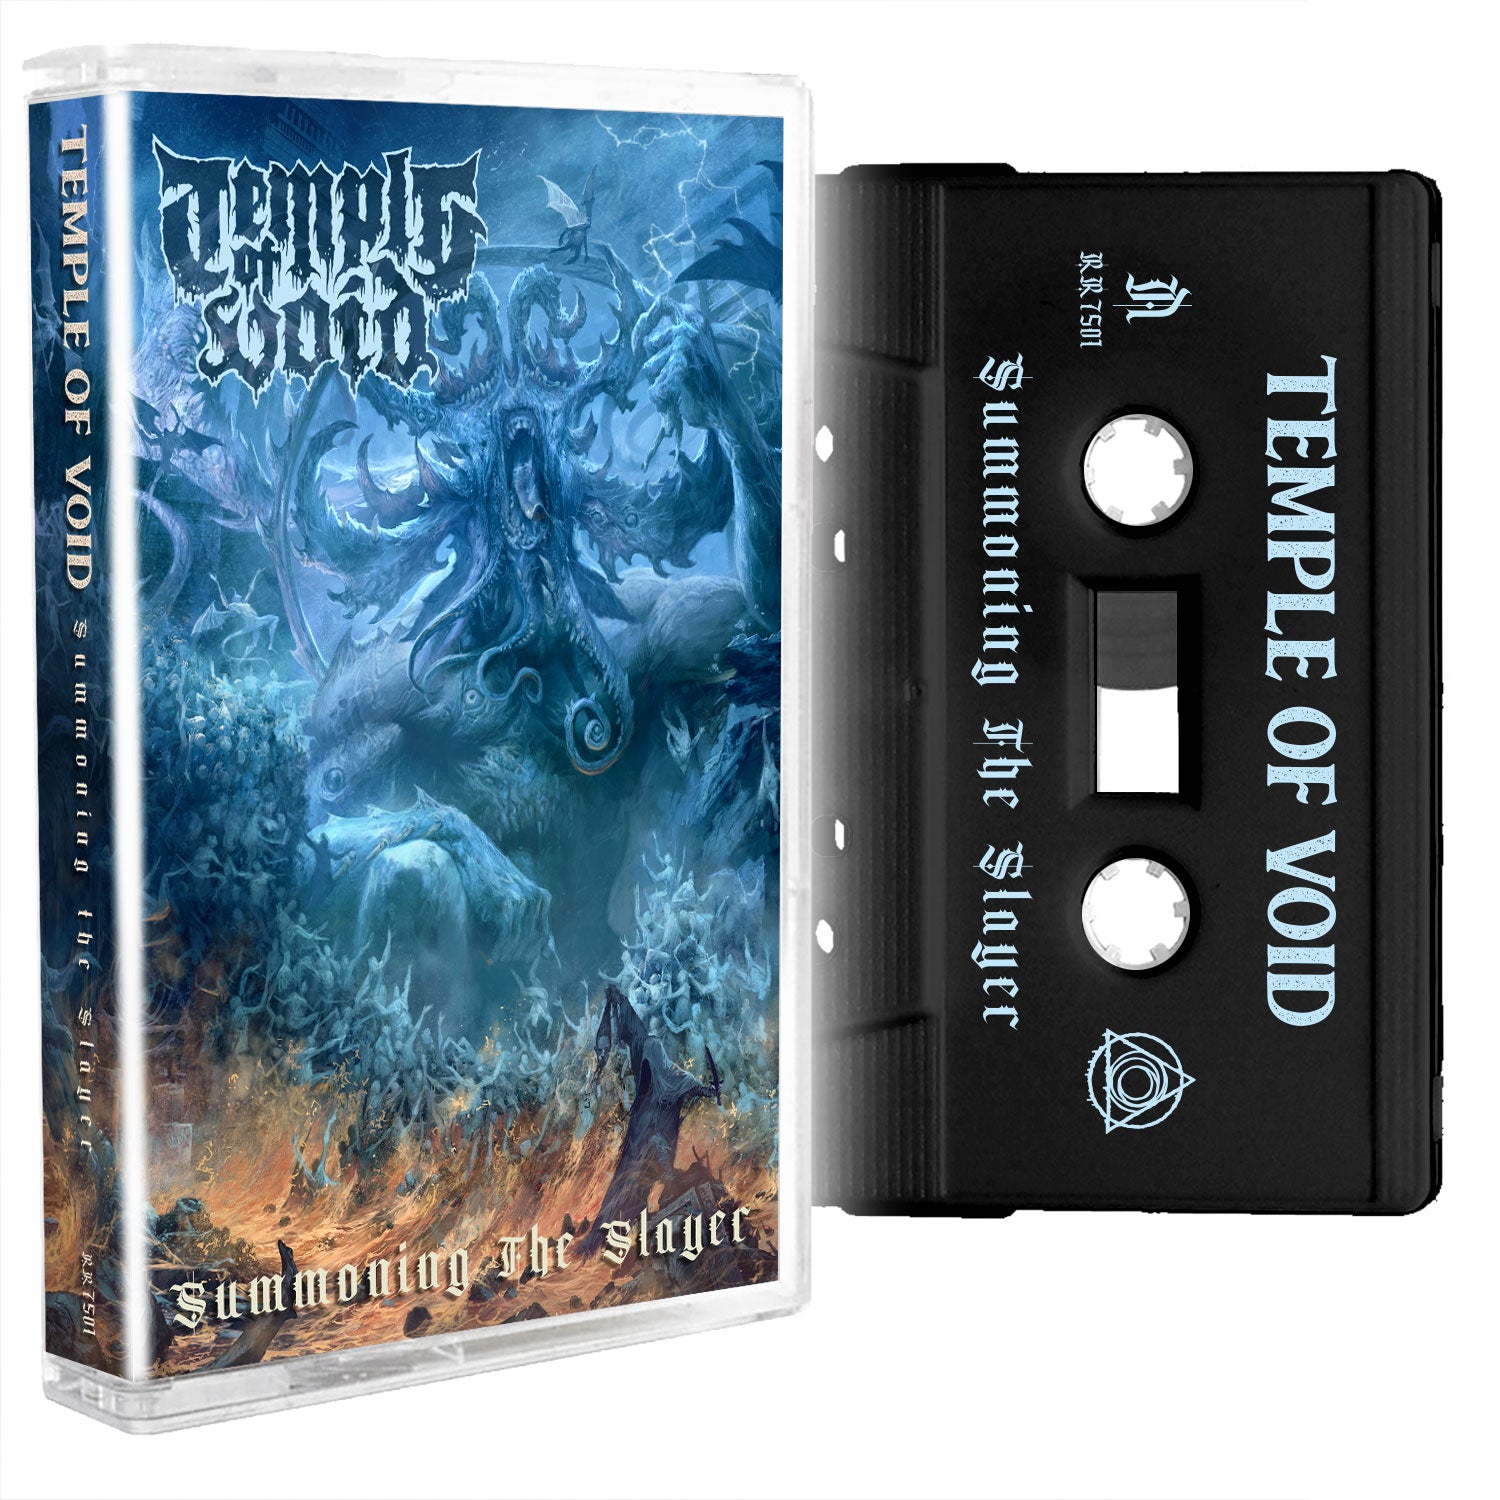 TEMPLE OF VOID - SUMMONING THE SLAYER Cassette Tape